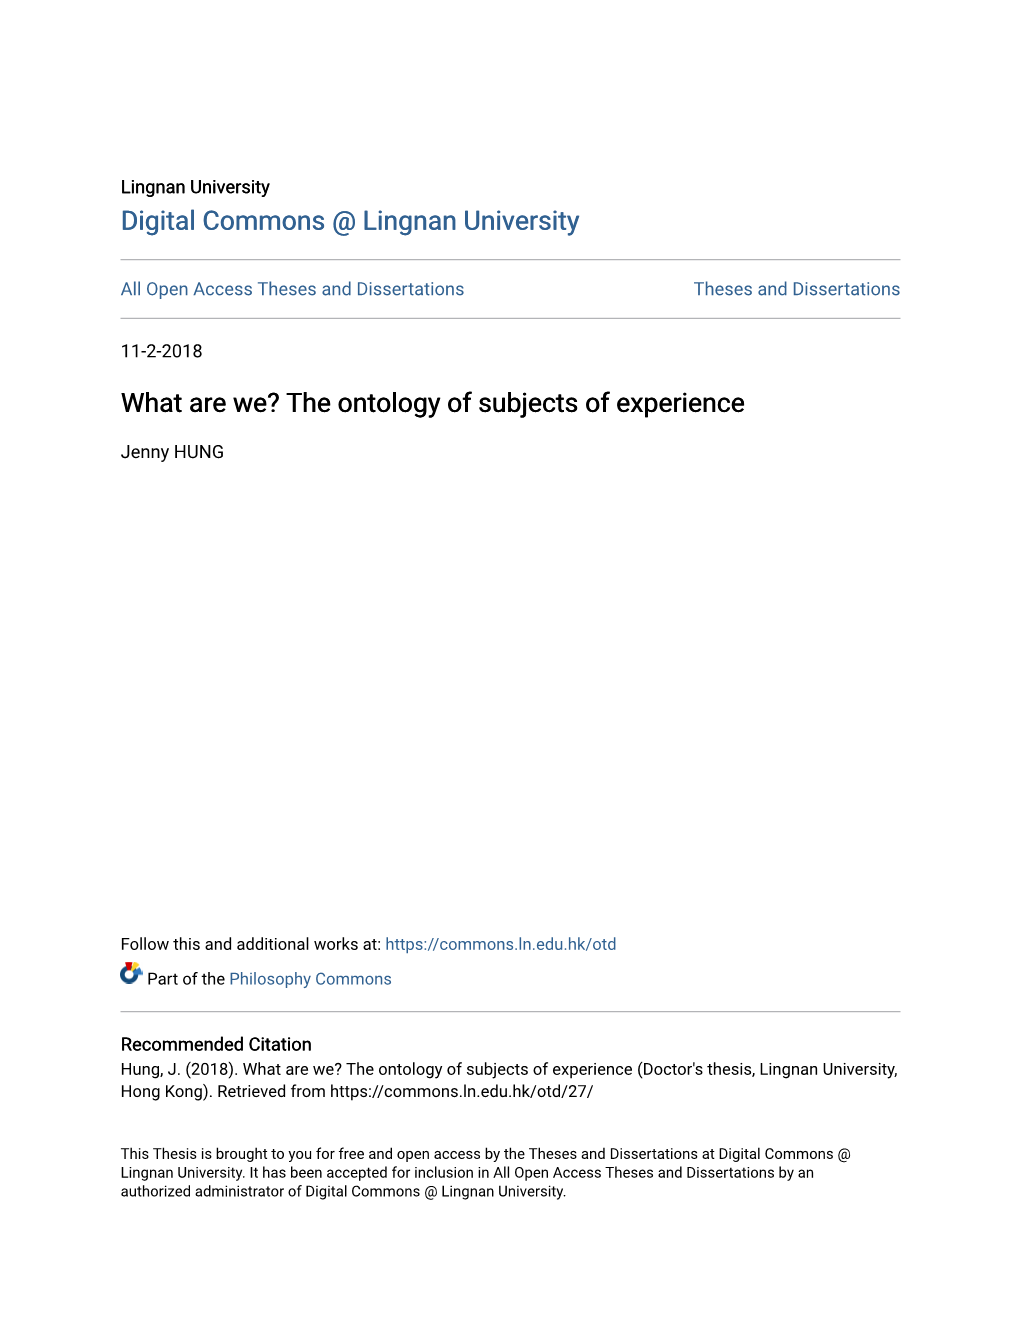 The Ontology of Subjects of Experience